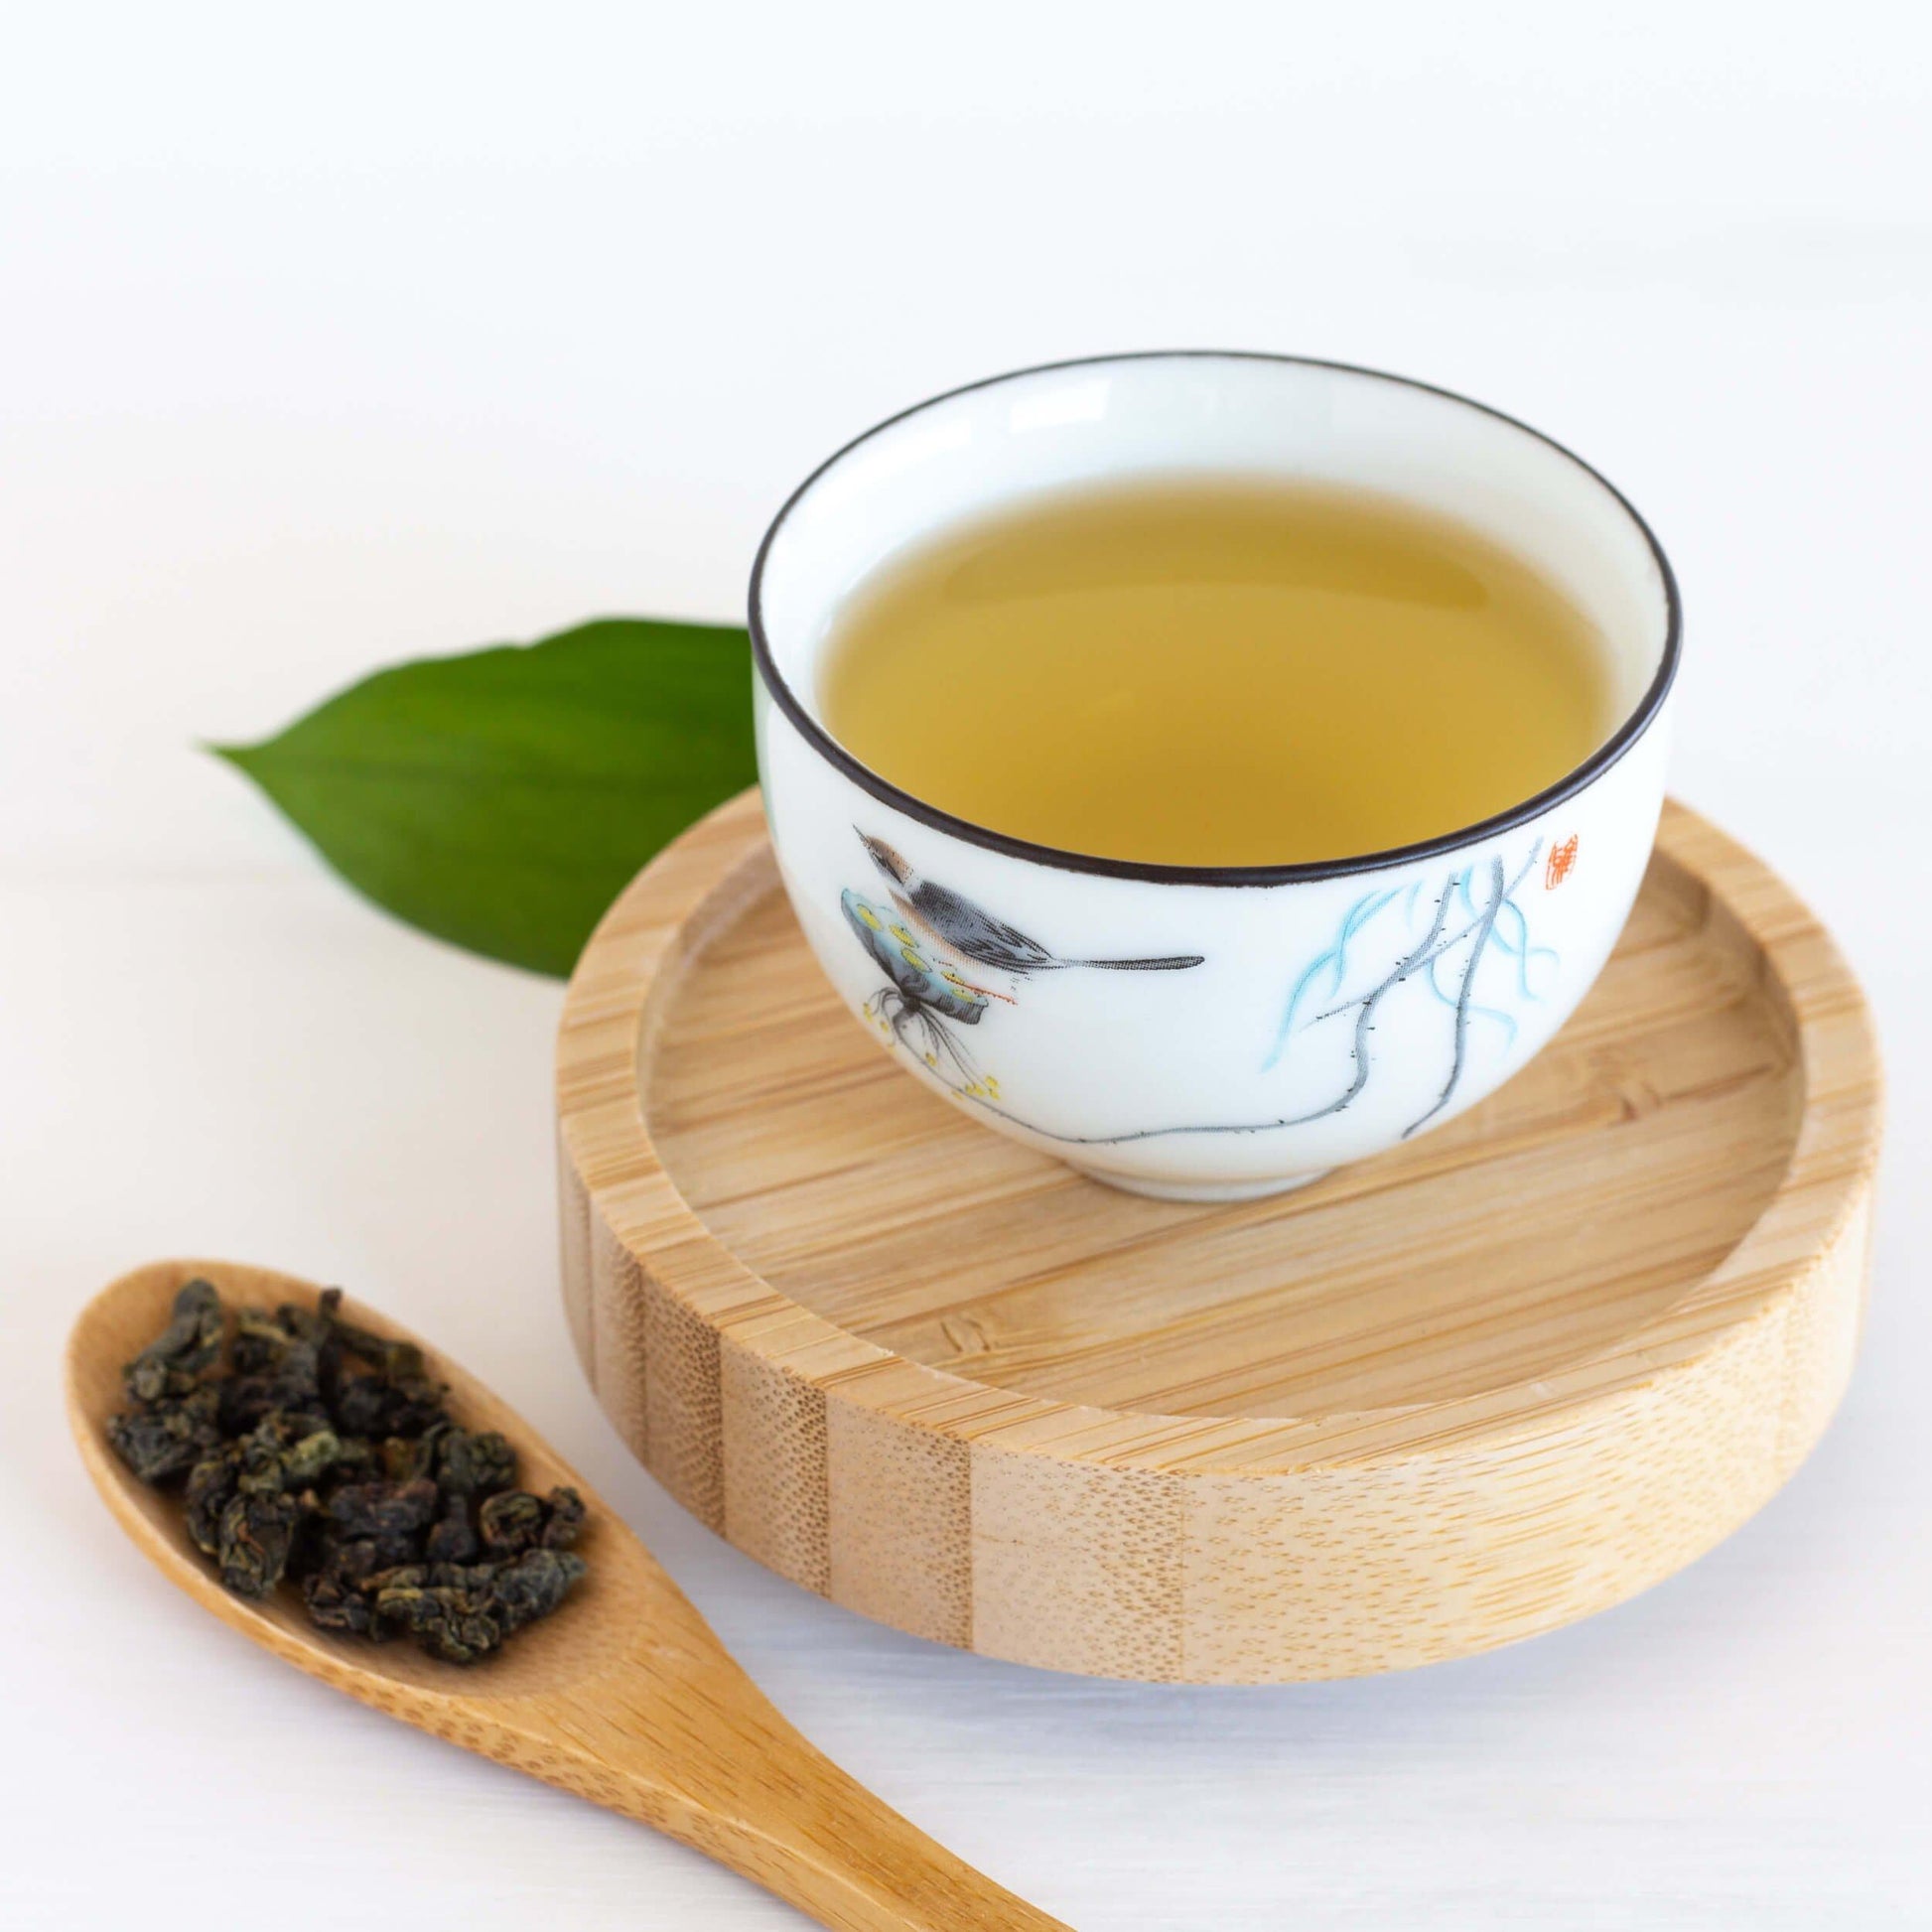 Jade Song Oolong Tea shown as brewed tea in a tiny white teacup with a bird design, displayed on a round bamboo coaster with a spoon of loose tea leaves